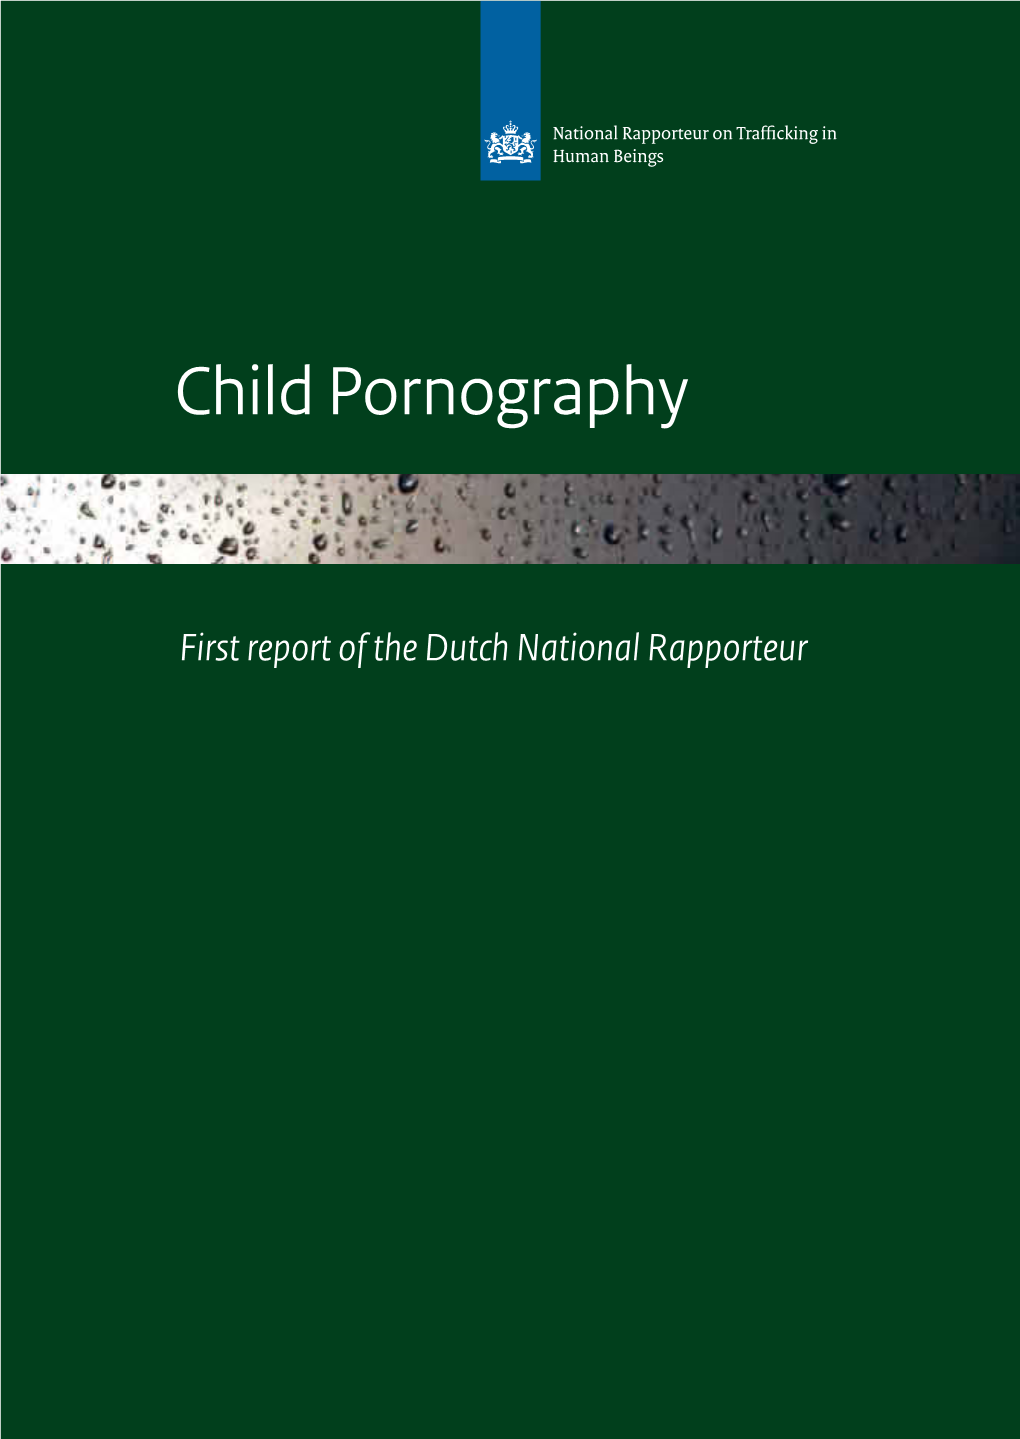 Child Pornography National Rapporteur on Trafficking in Human Beings